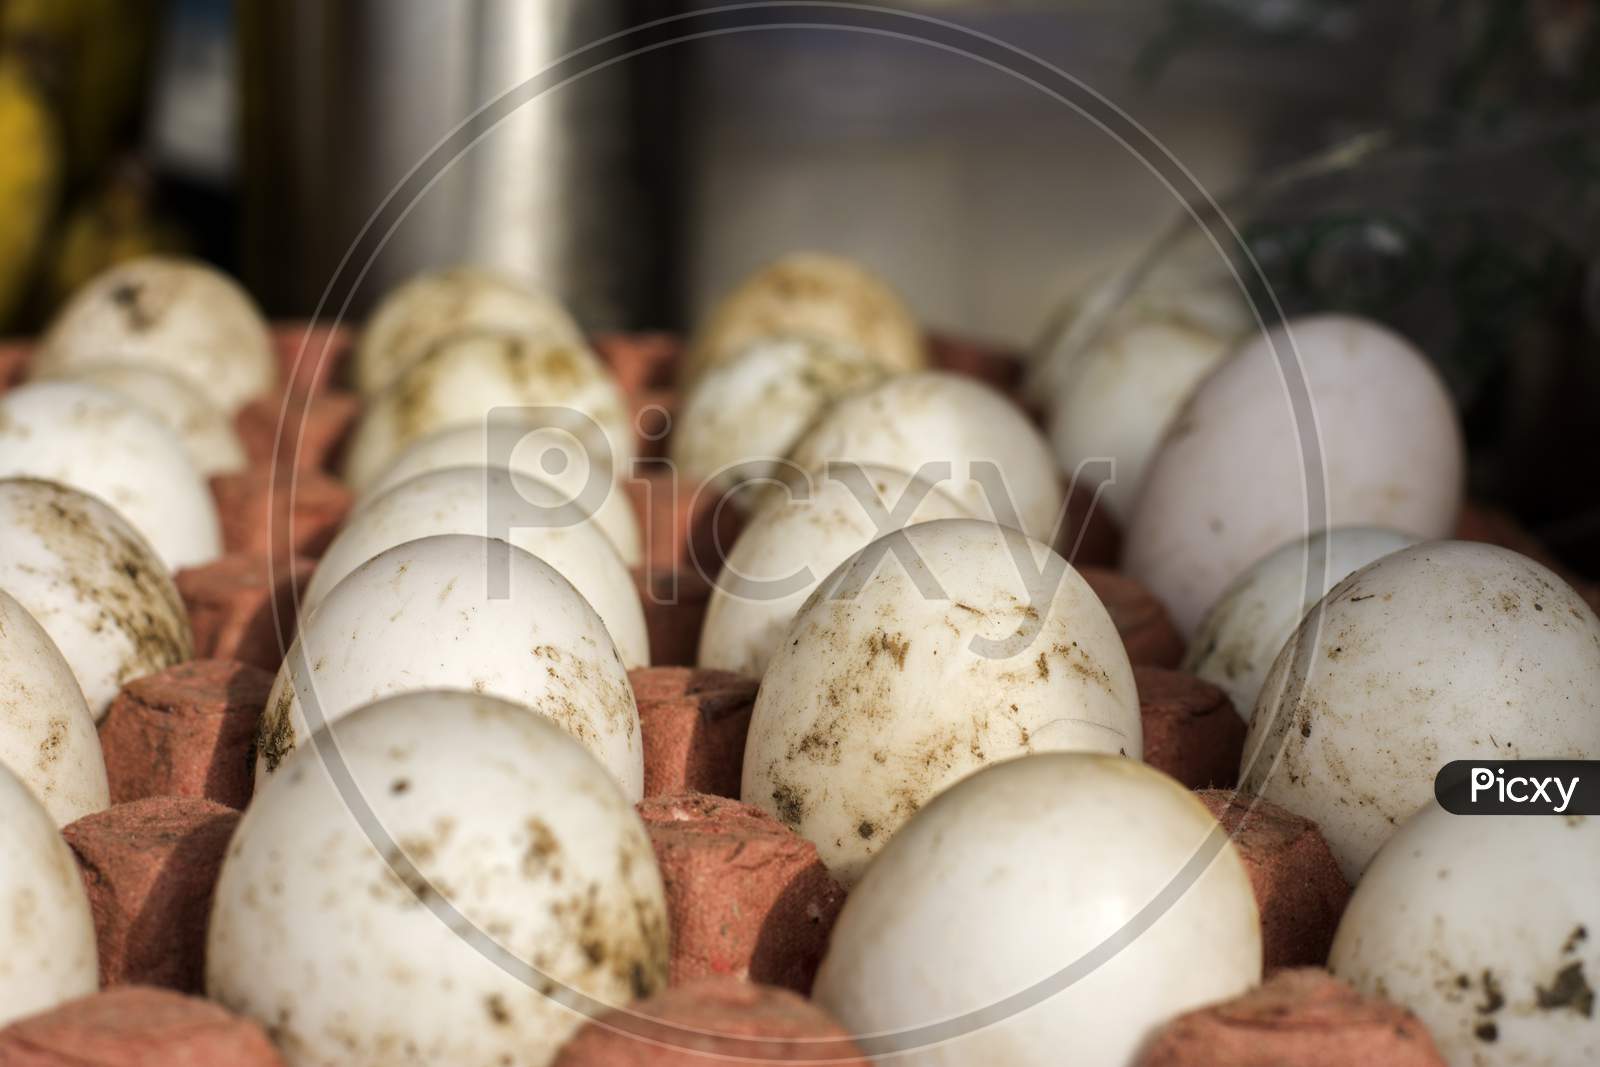 A Rack Full Of Eggs With Selective Focus